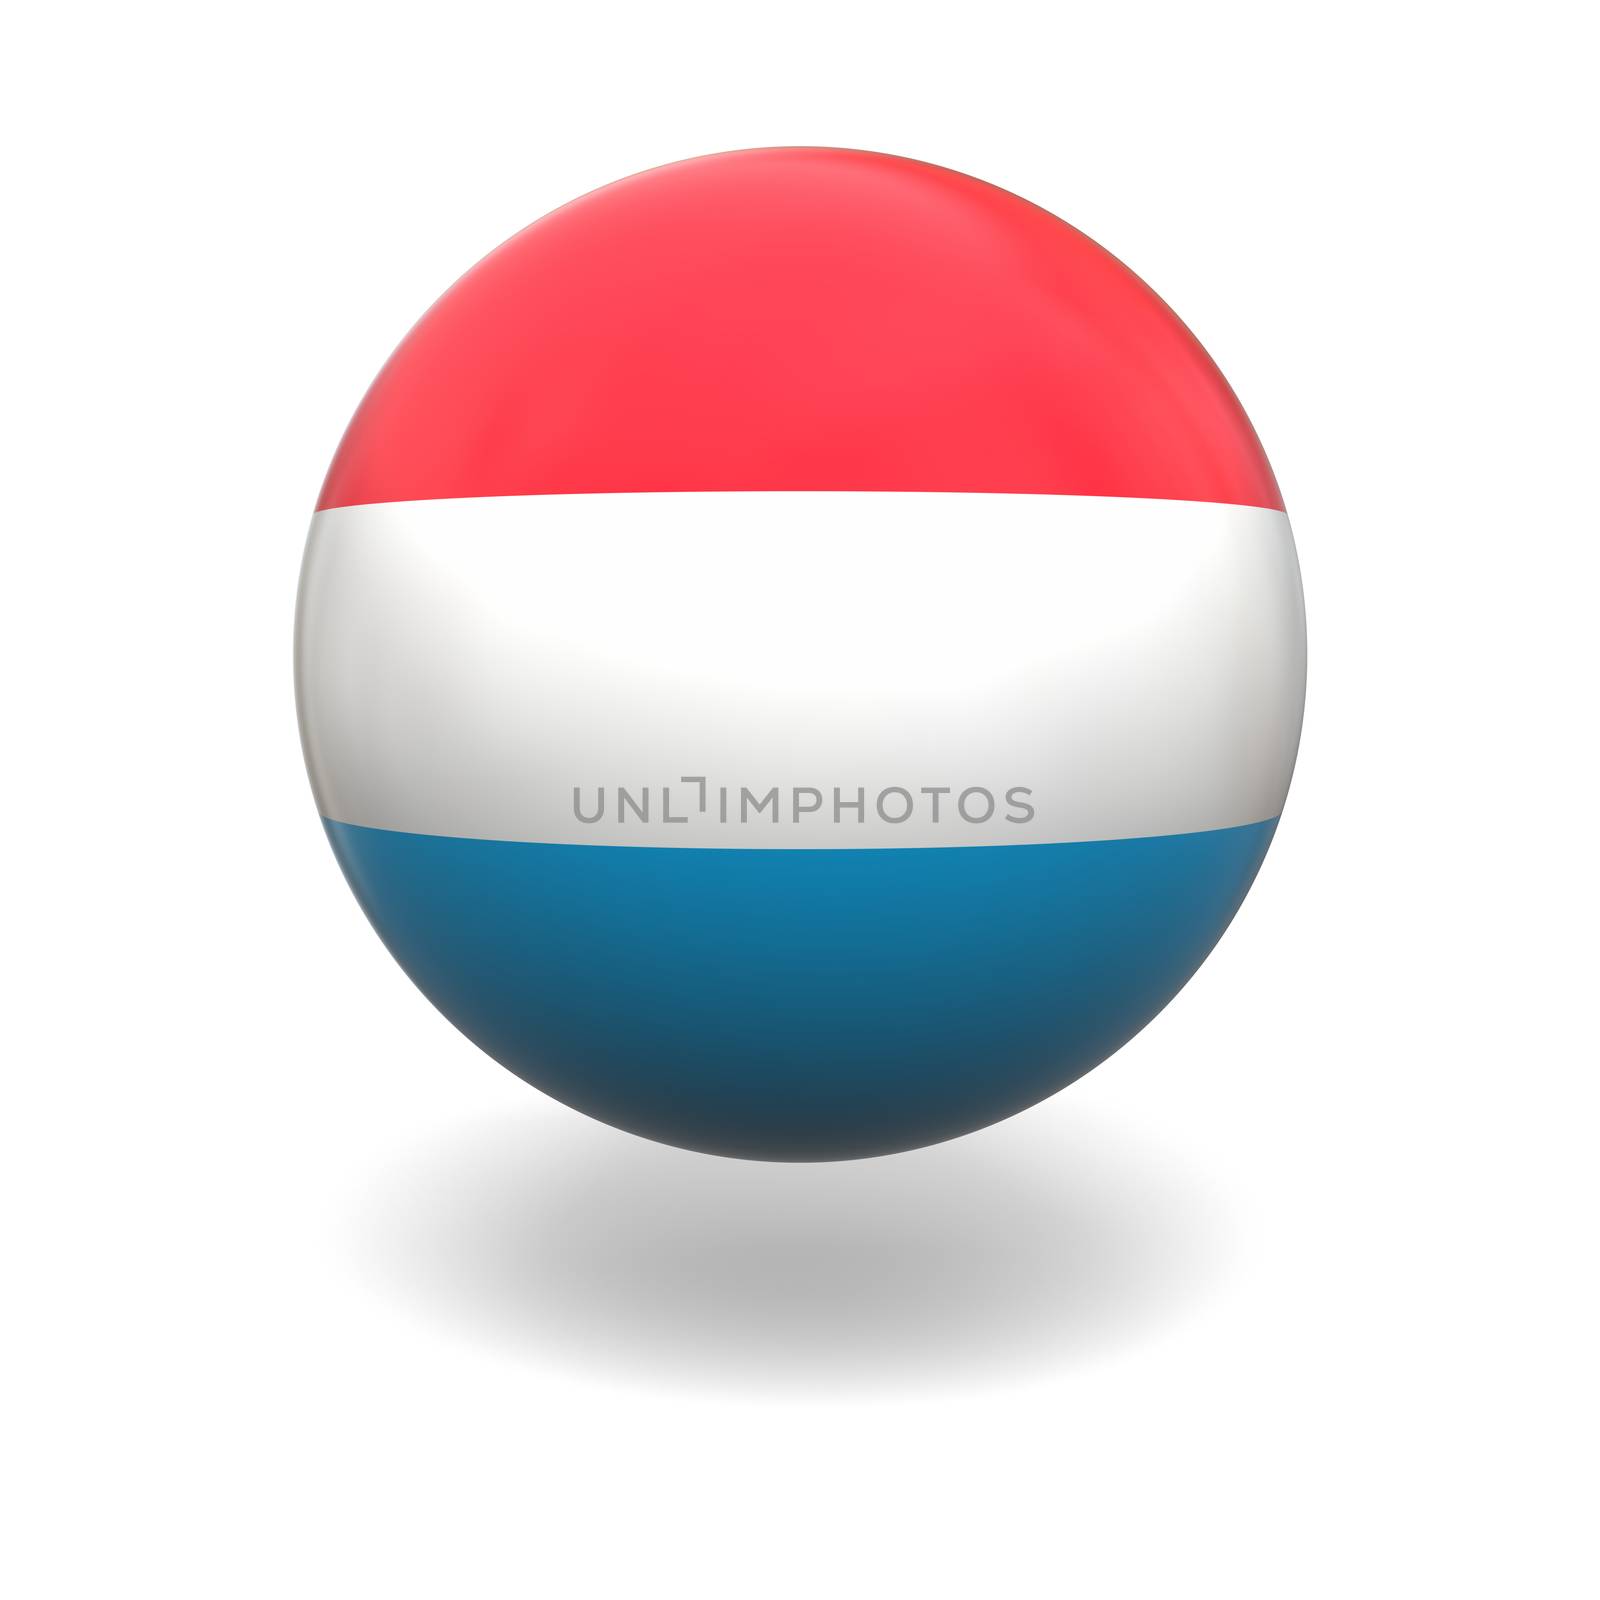 National flag of Luxembourg a on sphere isolated on white background